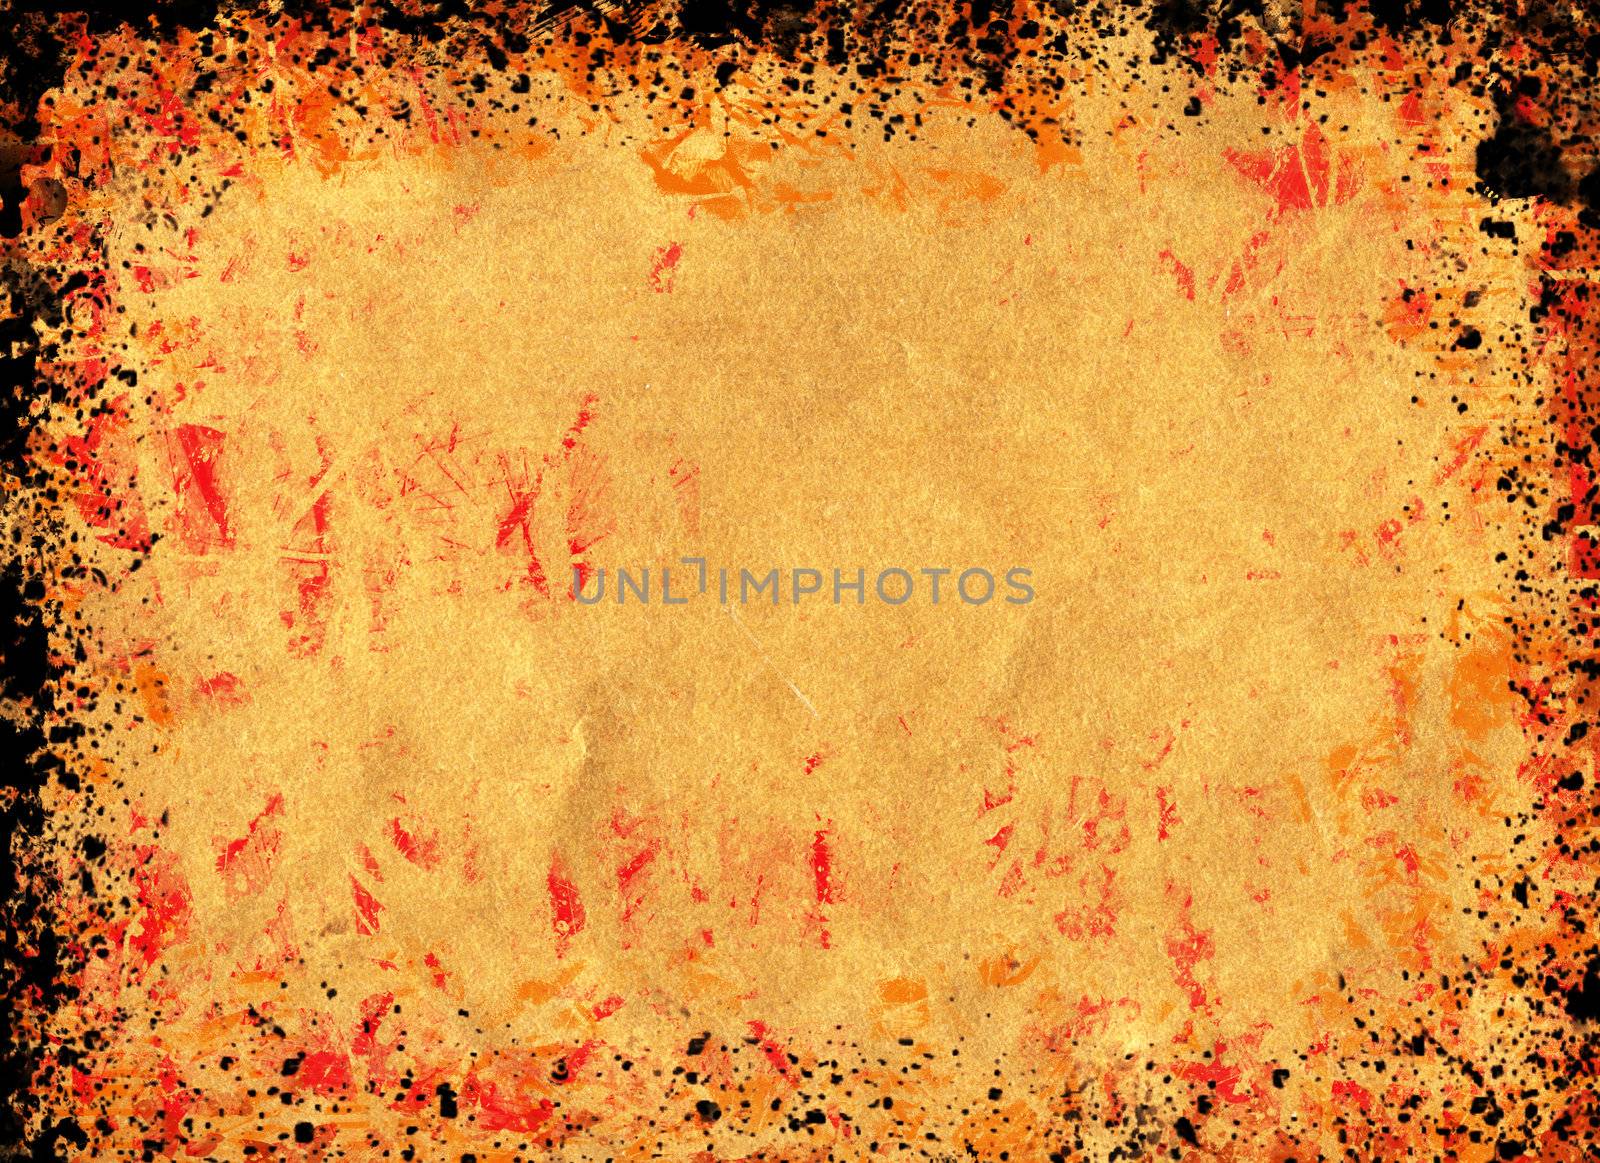 Grunge background based on brown textured paper with border, decorated with crayon - ink effect spattering. Ideal for autumn themed concepts.